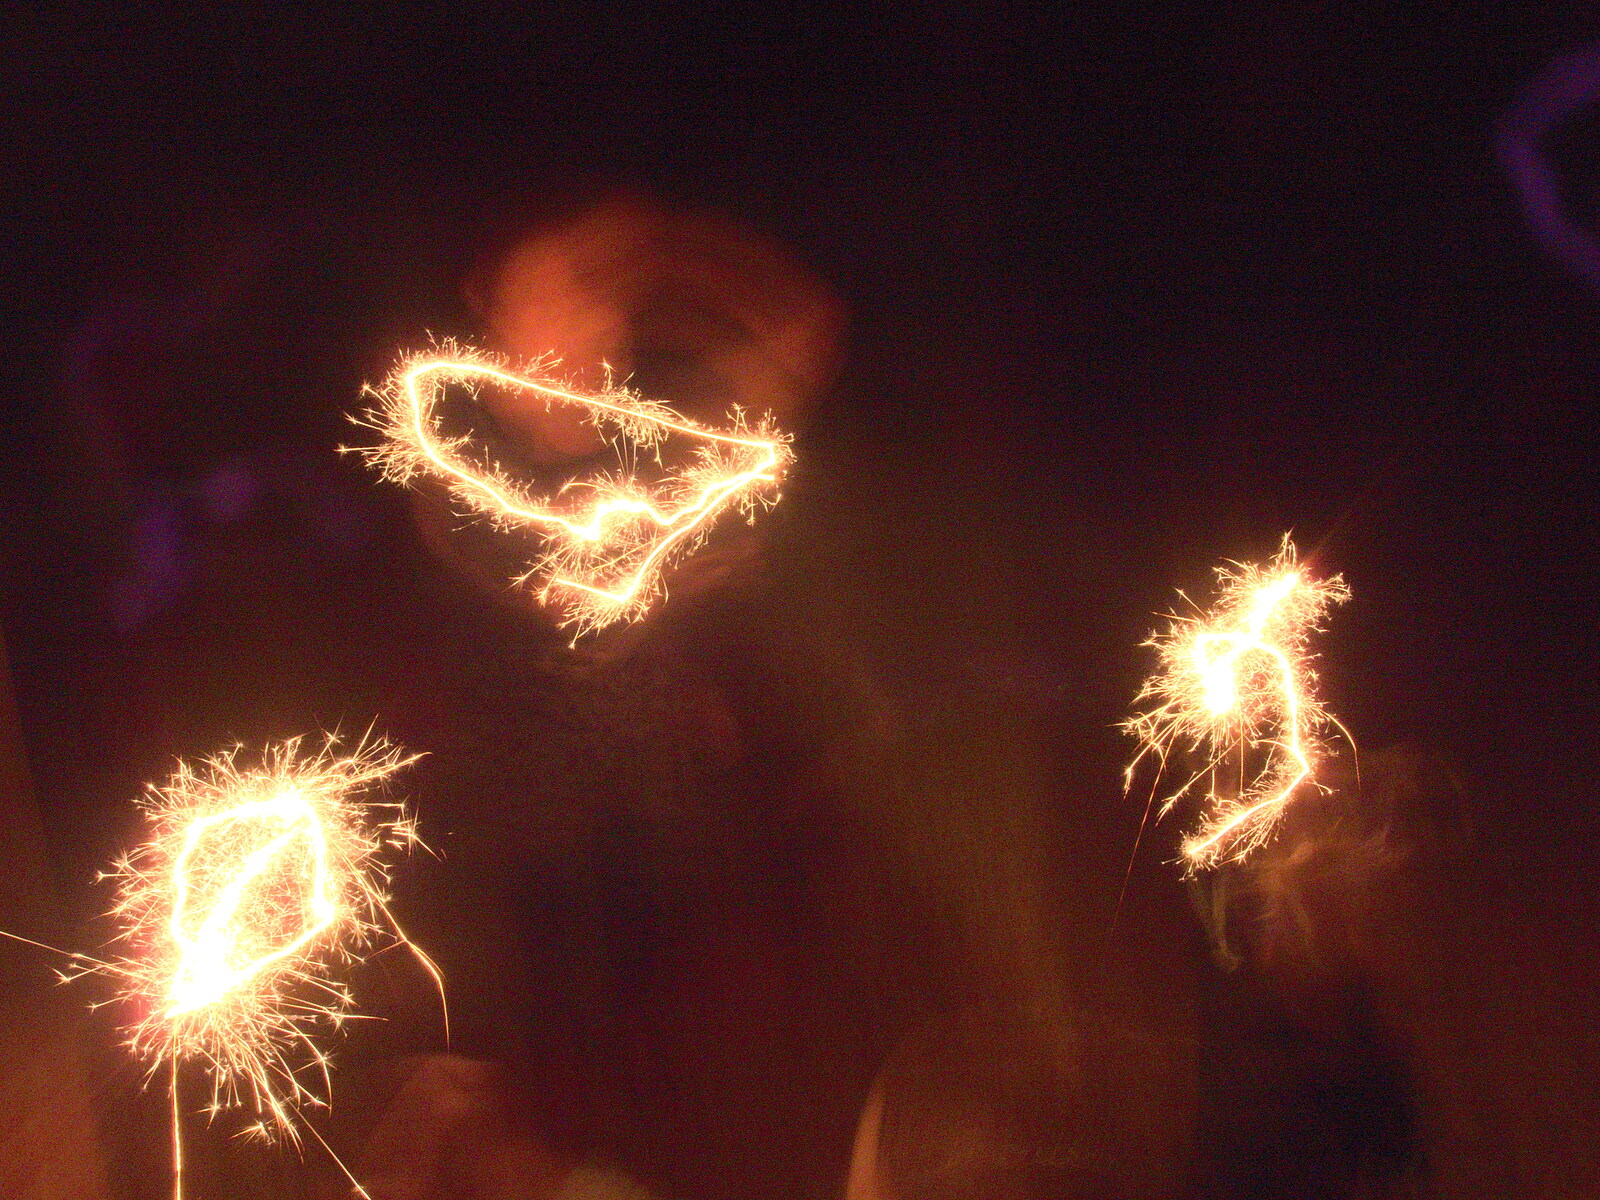 It's sparkler-tastic from John Willy's 65th and Other Stories, The Swan, Brome, Suffolk - 31st October 2015